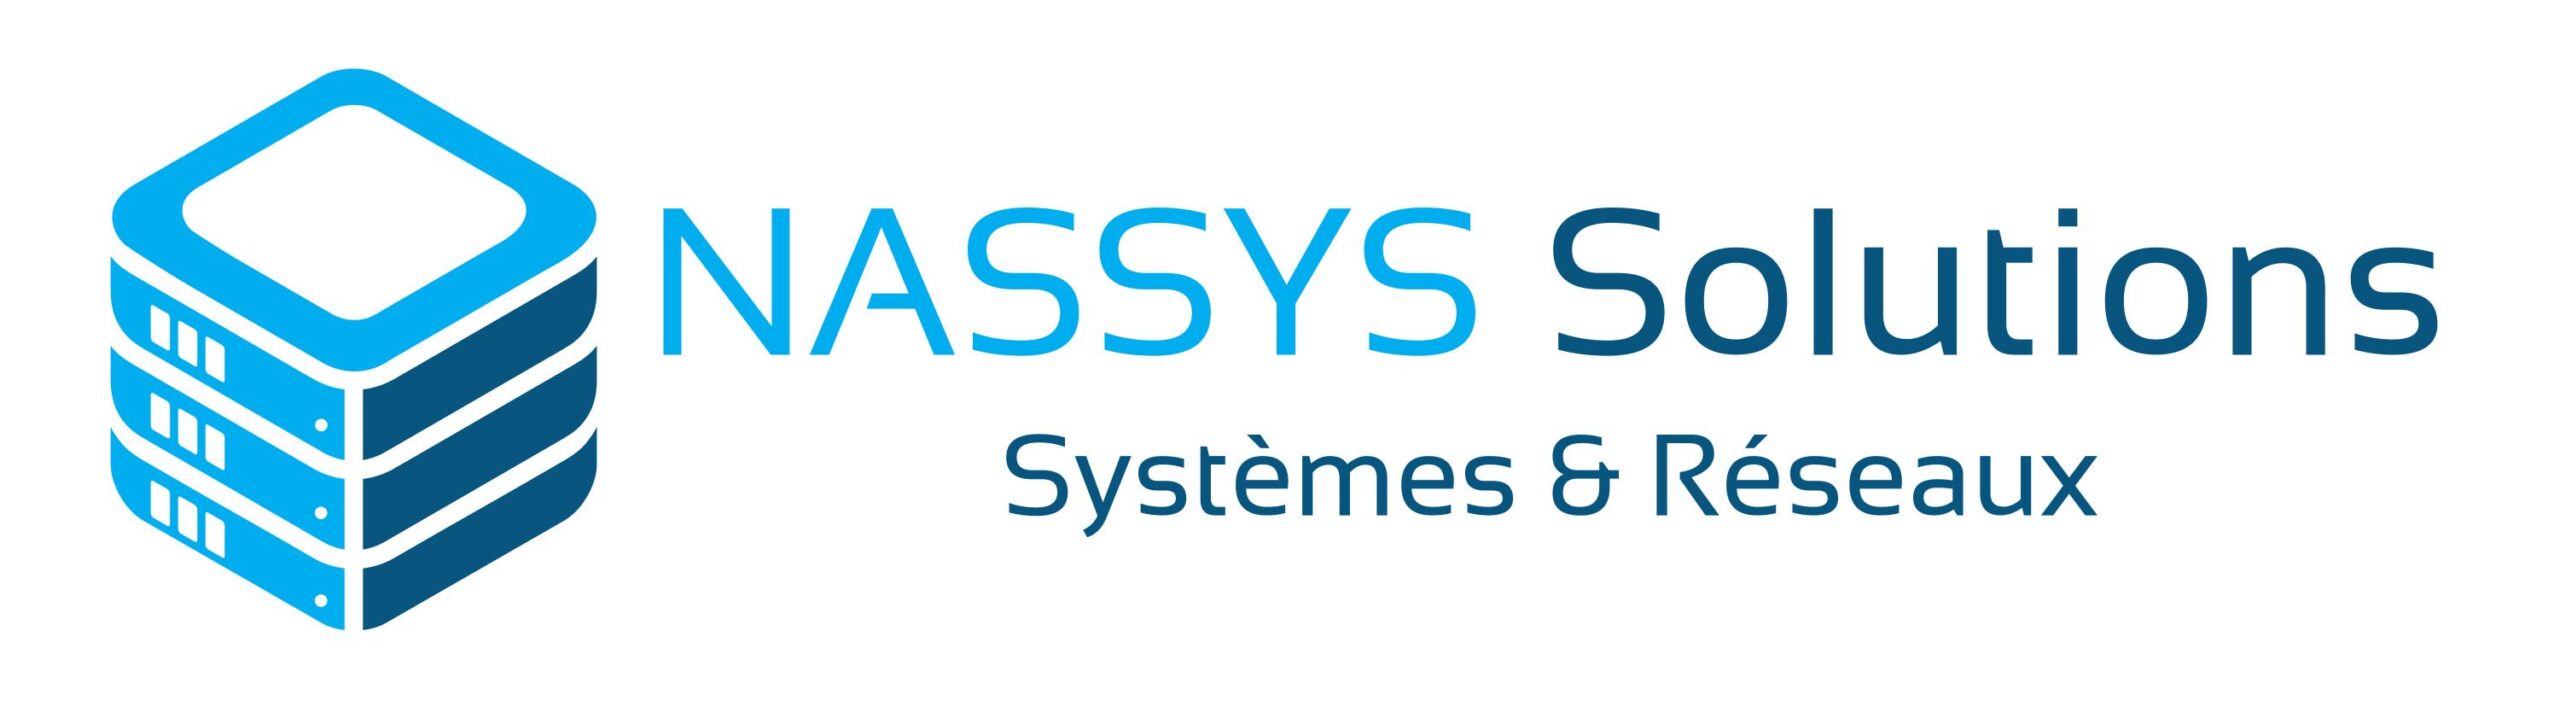 Nassys Solutions